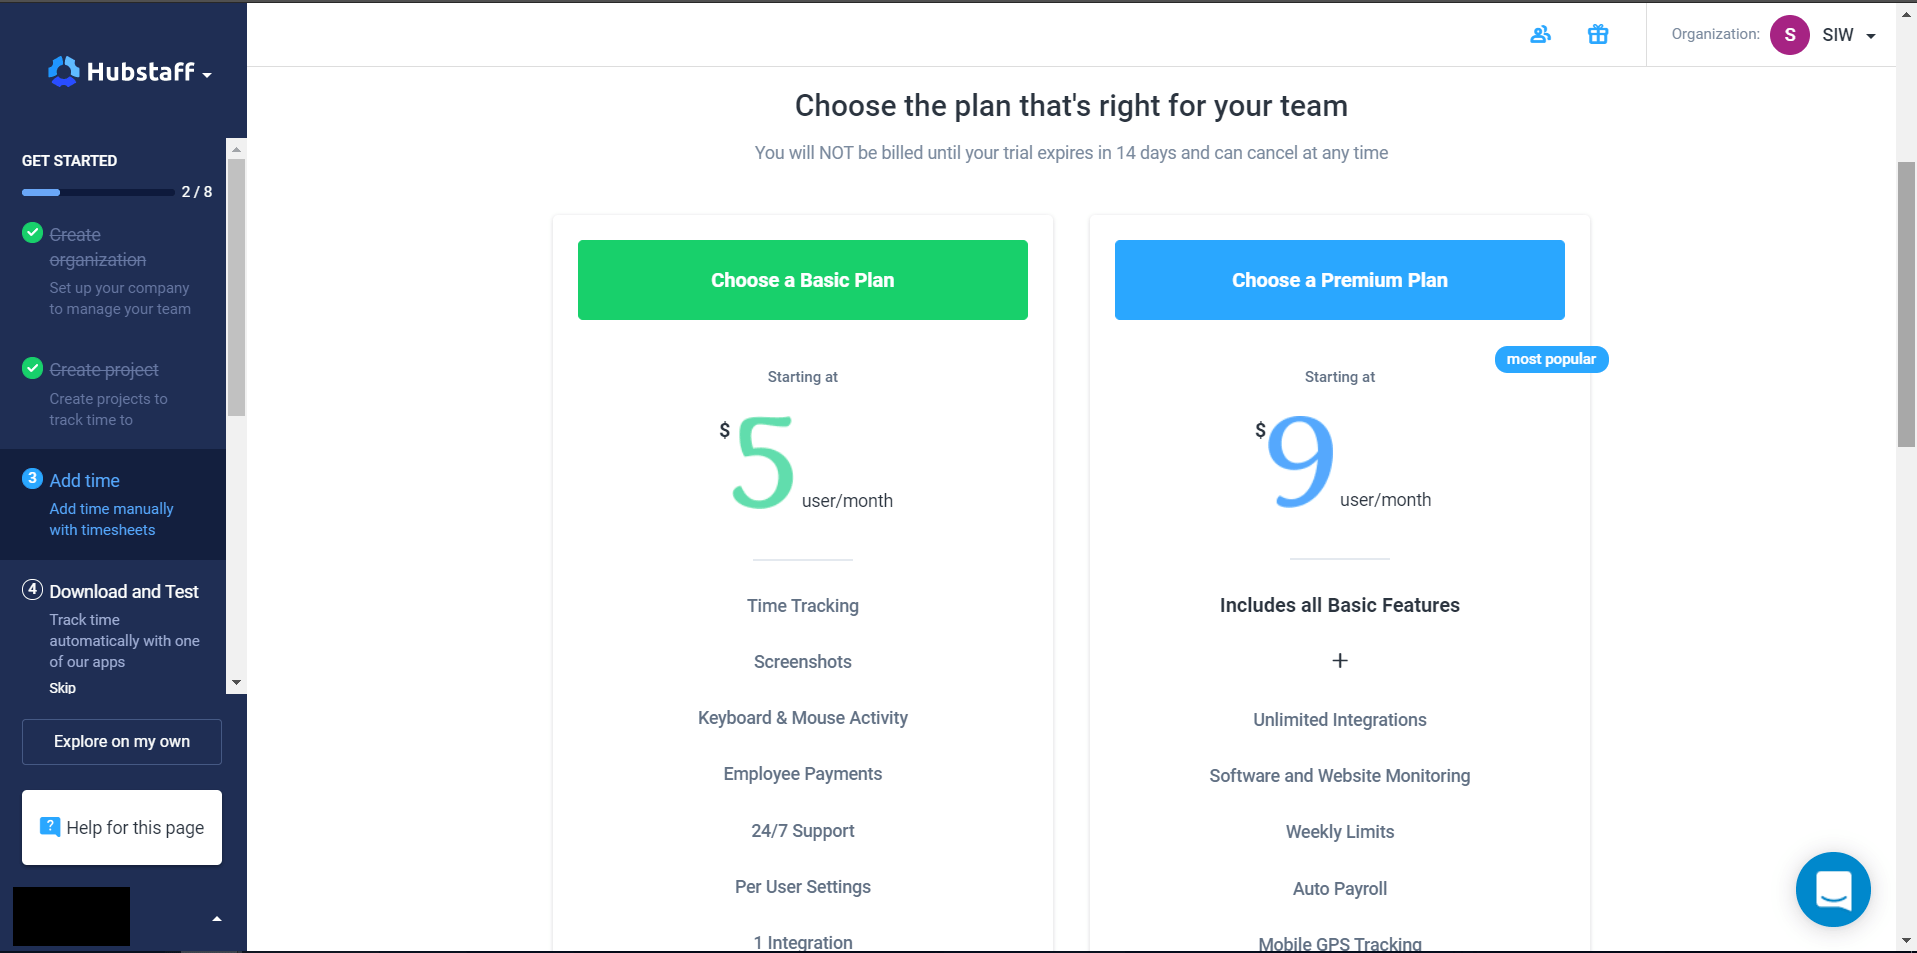 How Does the Inactivity Warning Work in Hubstaff Time Tracking